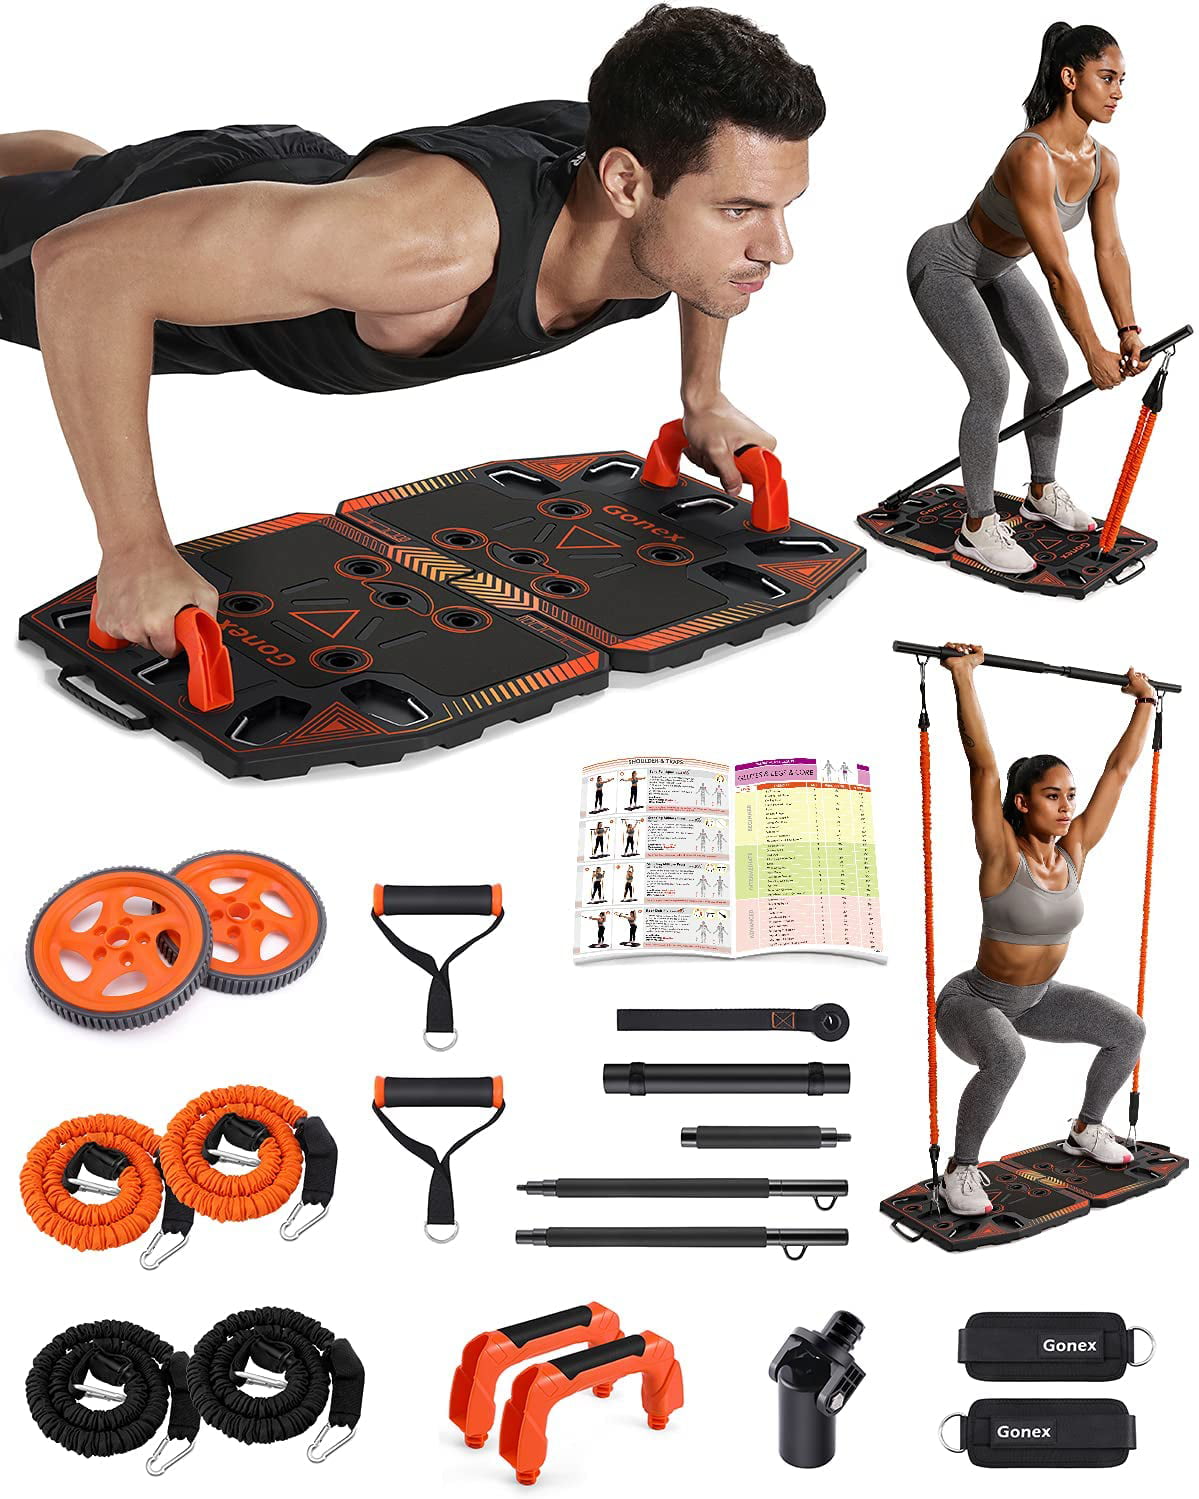 Push-up Handles Including Foldable Fitness Board 2-Section Bar Home Workout Equipment for Women & Men Resistance Bands Ab Roller Wheel Full Body Workouts System w/ 14 Exercise Accessories GYMAX Portable Home Gym 